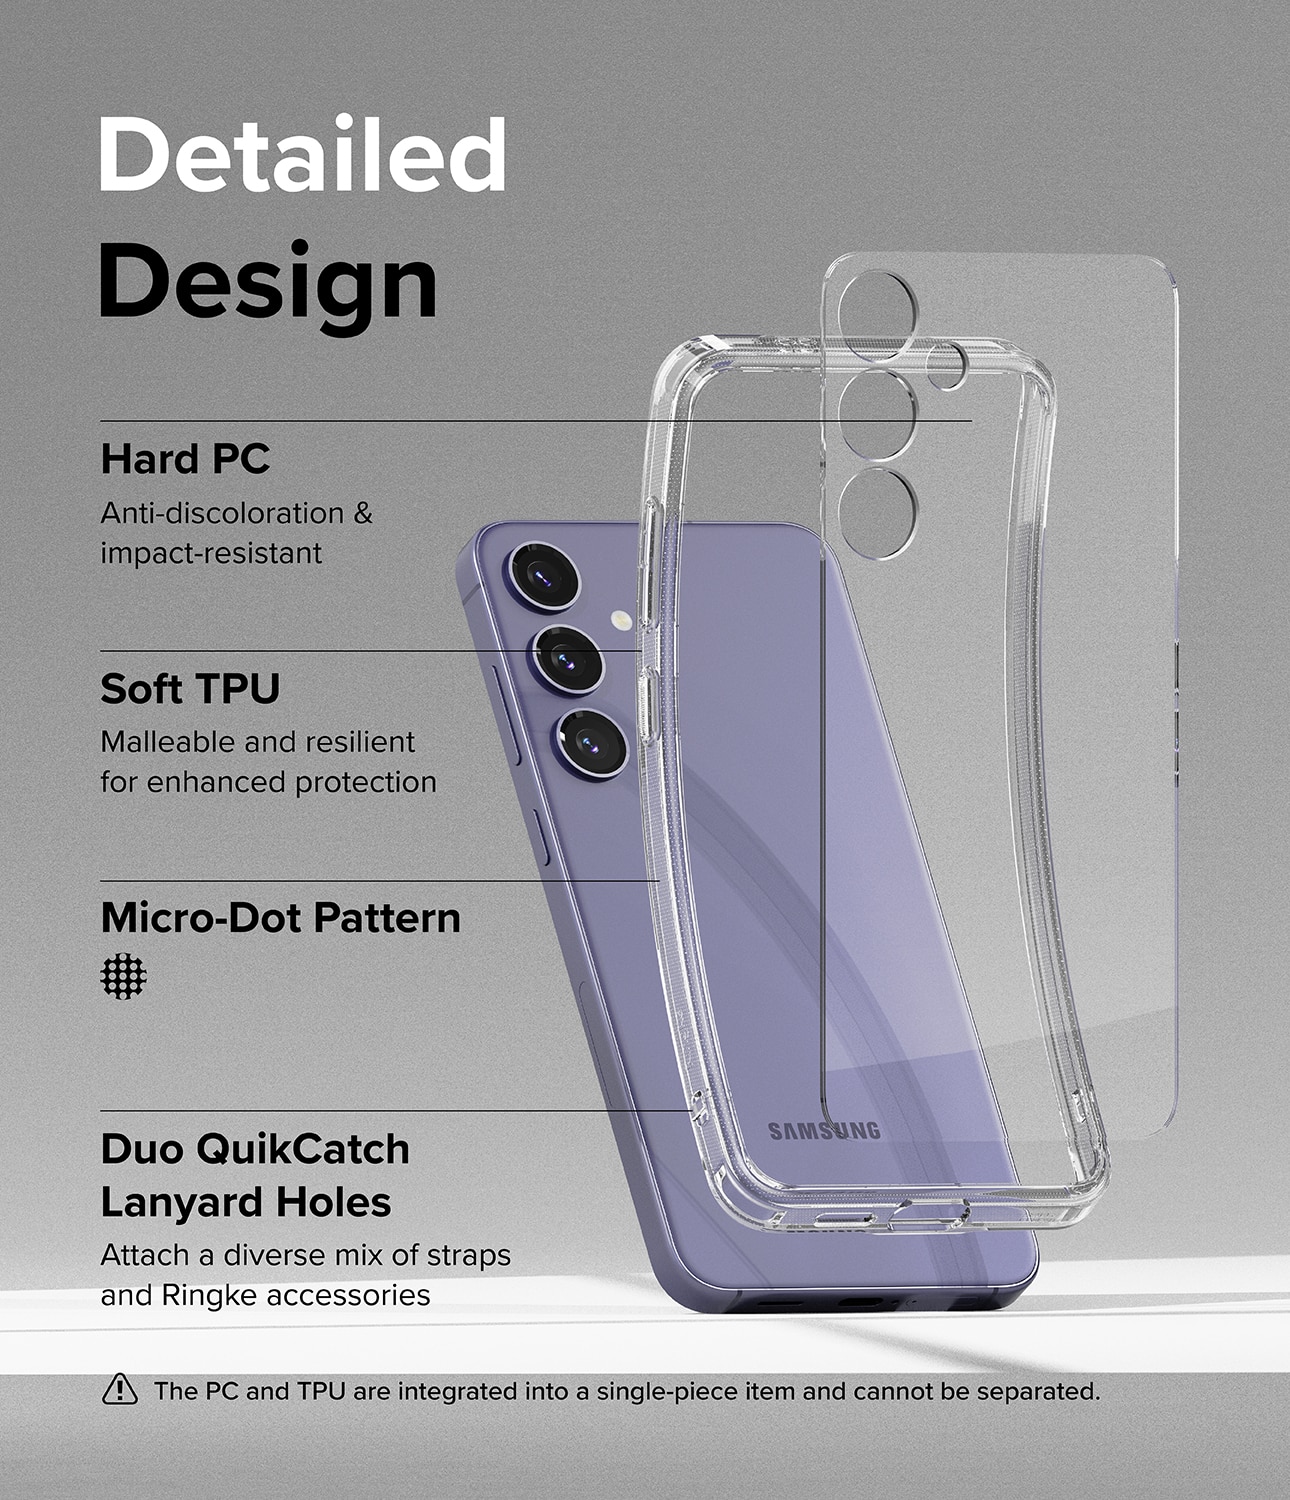 Cover Fusion Samsung Galaxy S24 Clear